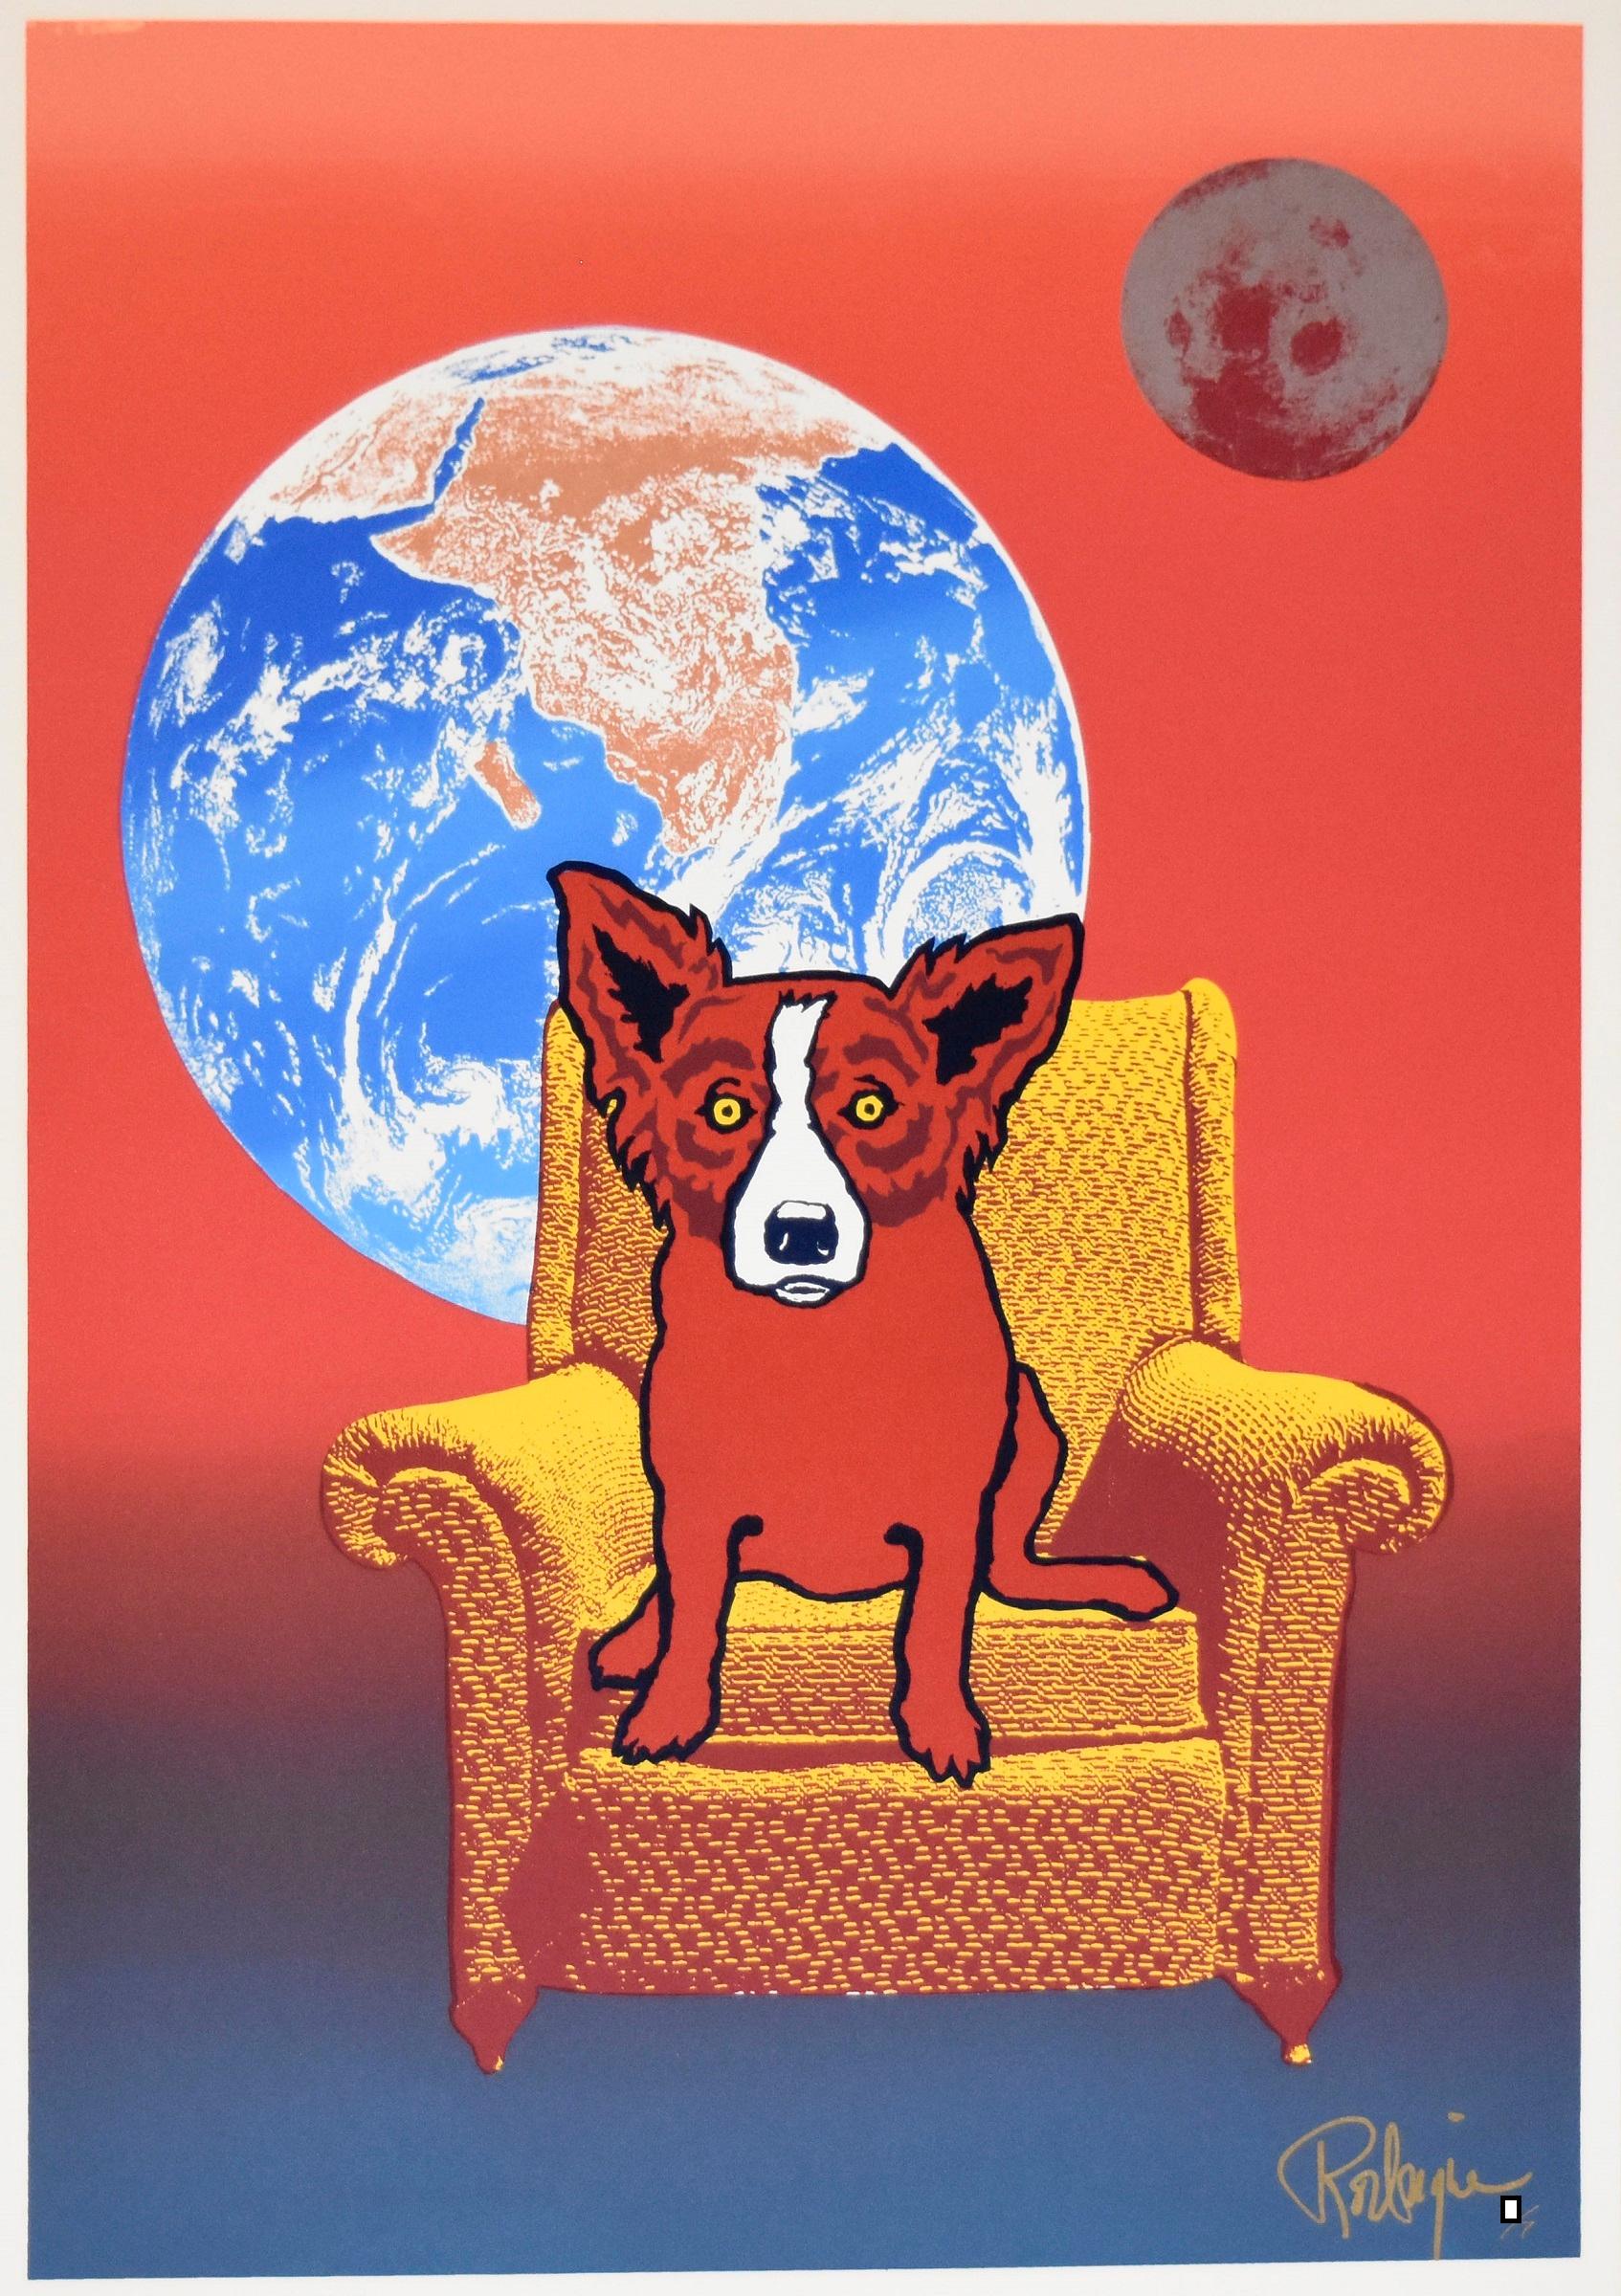 Strato Lounger Split Font with Red Dog - Signed Silkscreen Print Blue Dog